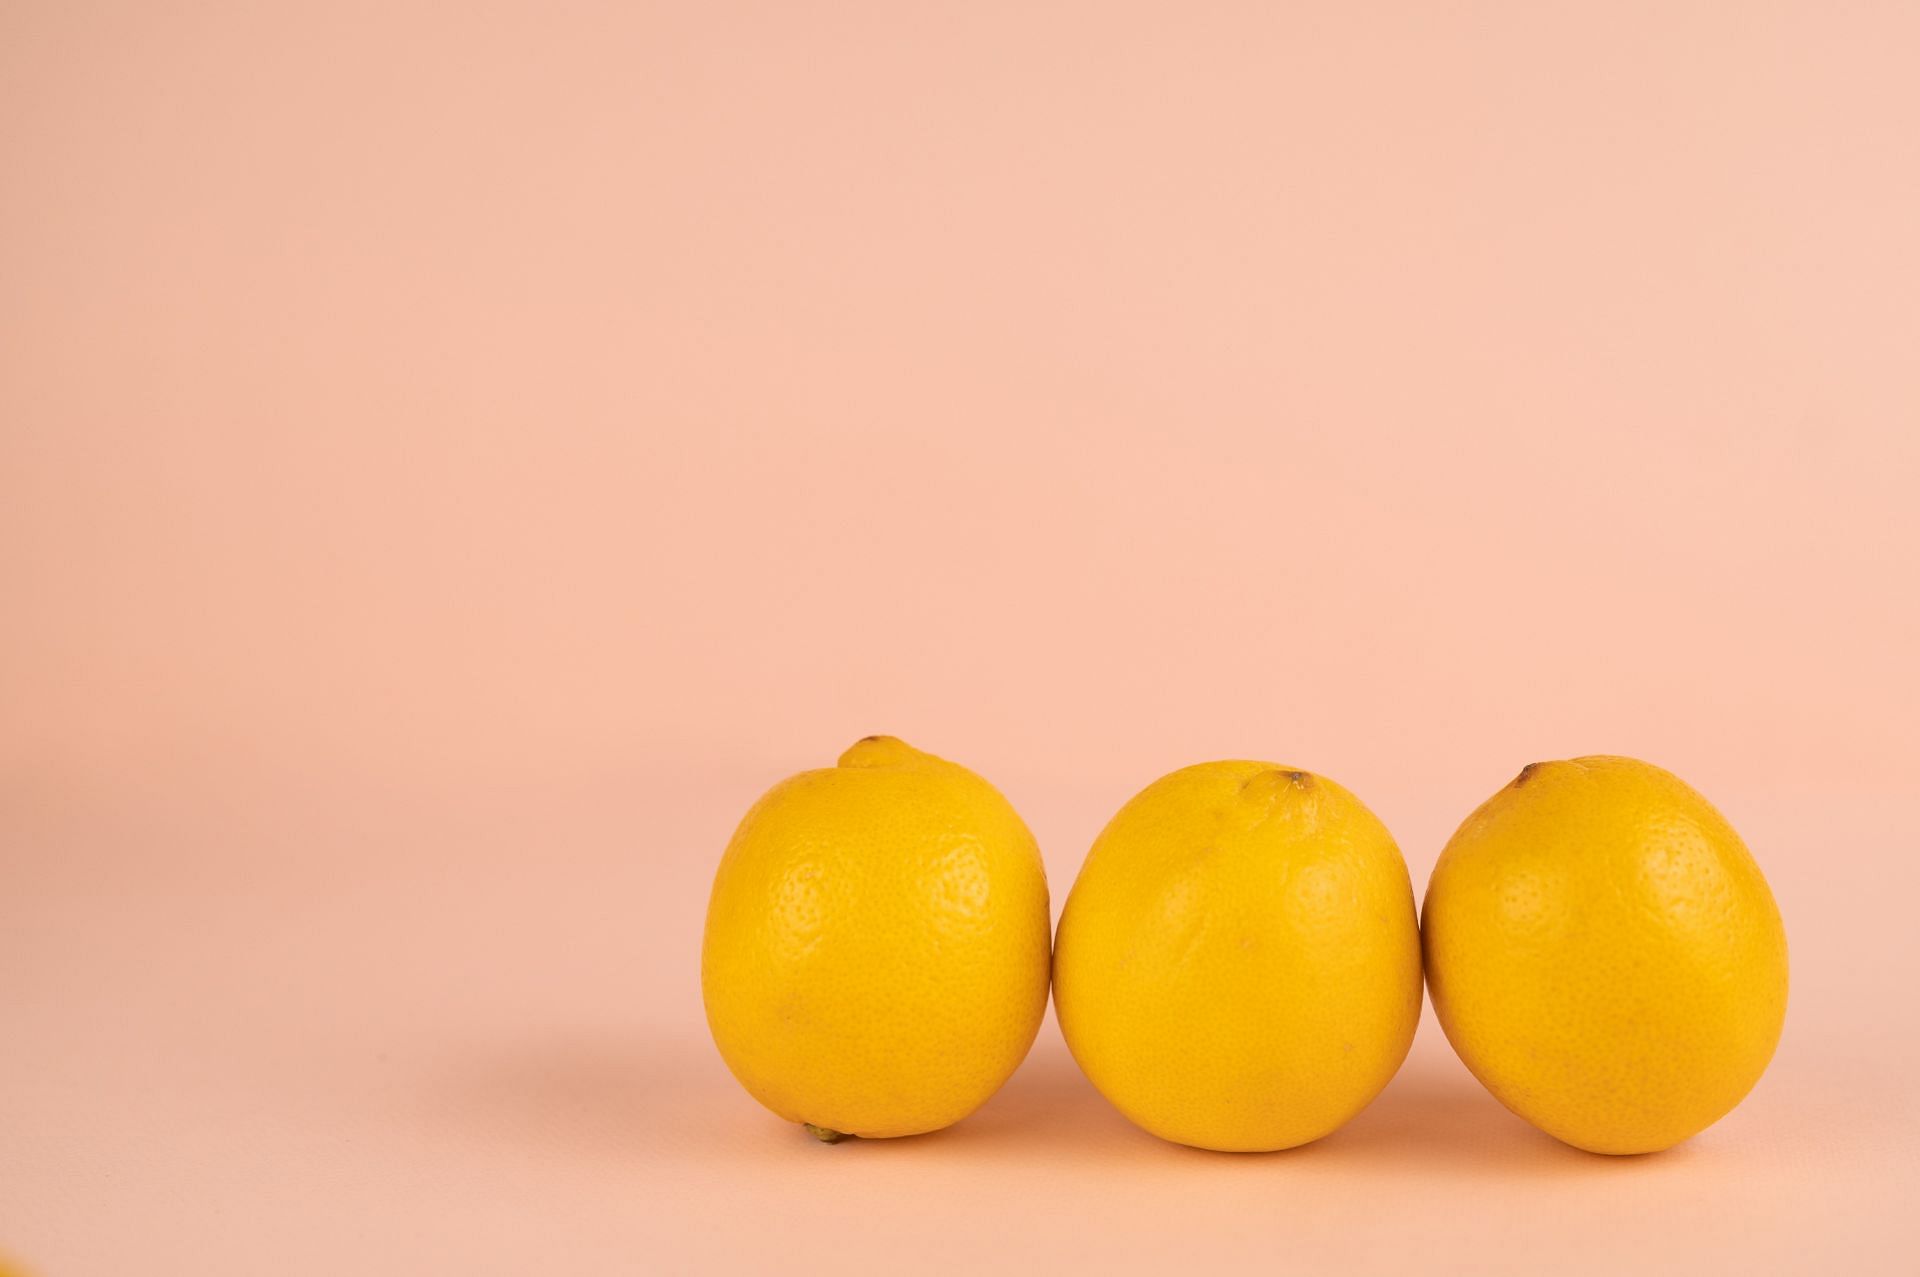 Tips to use lemons for reducing water weight (image sourced via Pexels / Photo by Shvets)